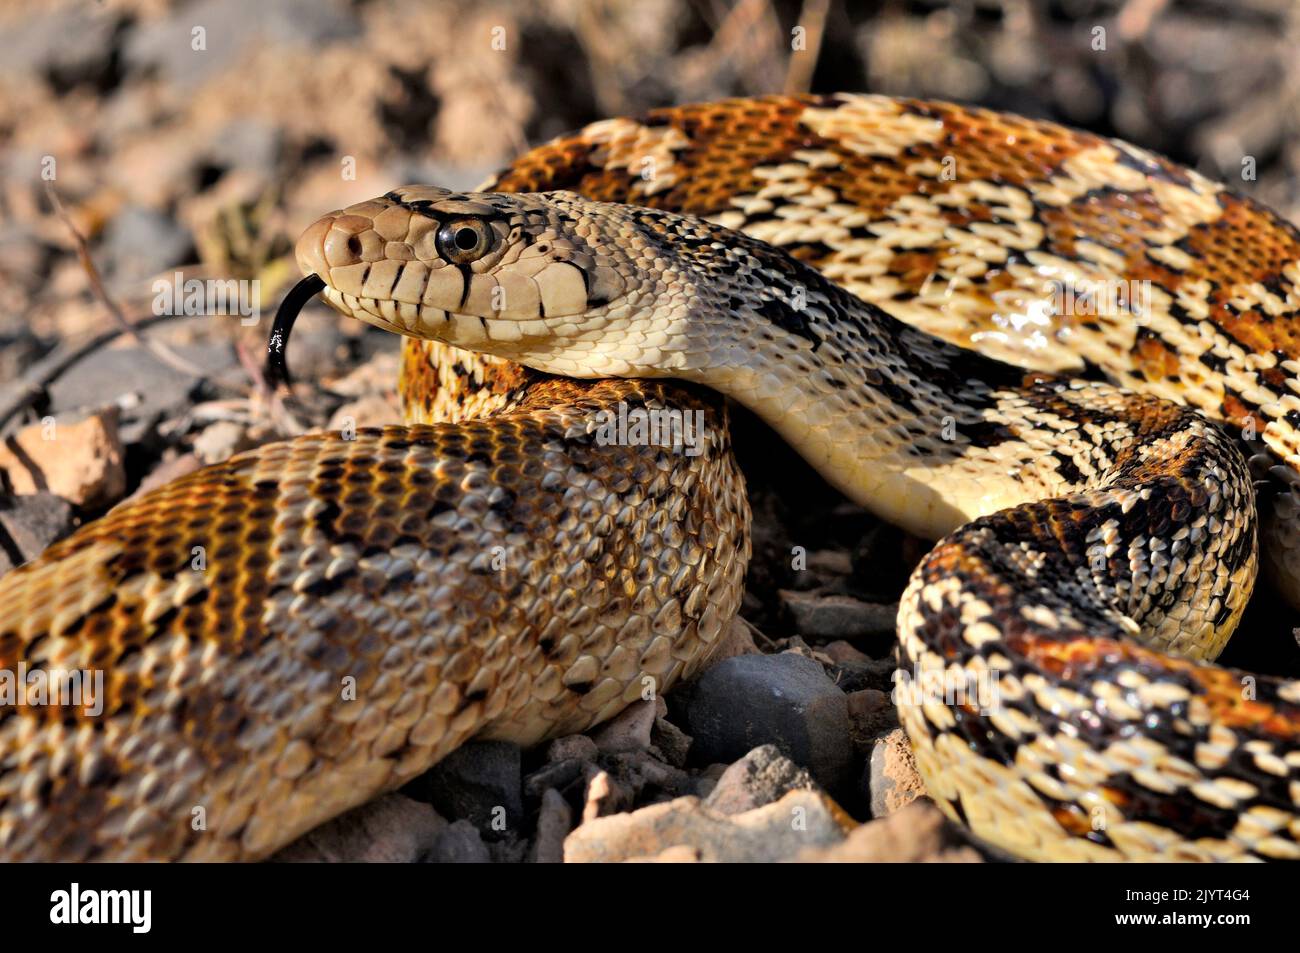 Sonoran gopher snake (Pituophis catenifer affinis), Sonora desert Stock Photo